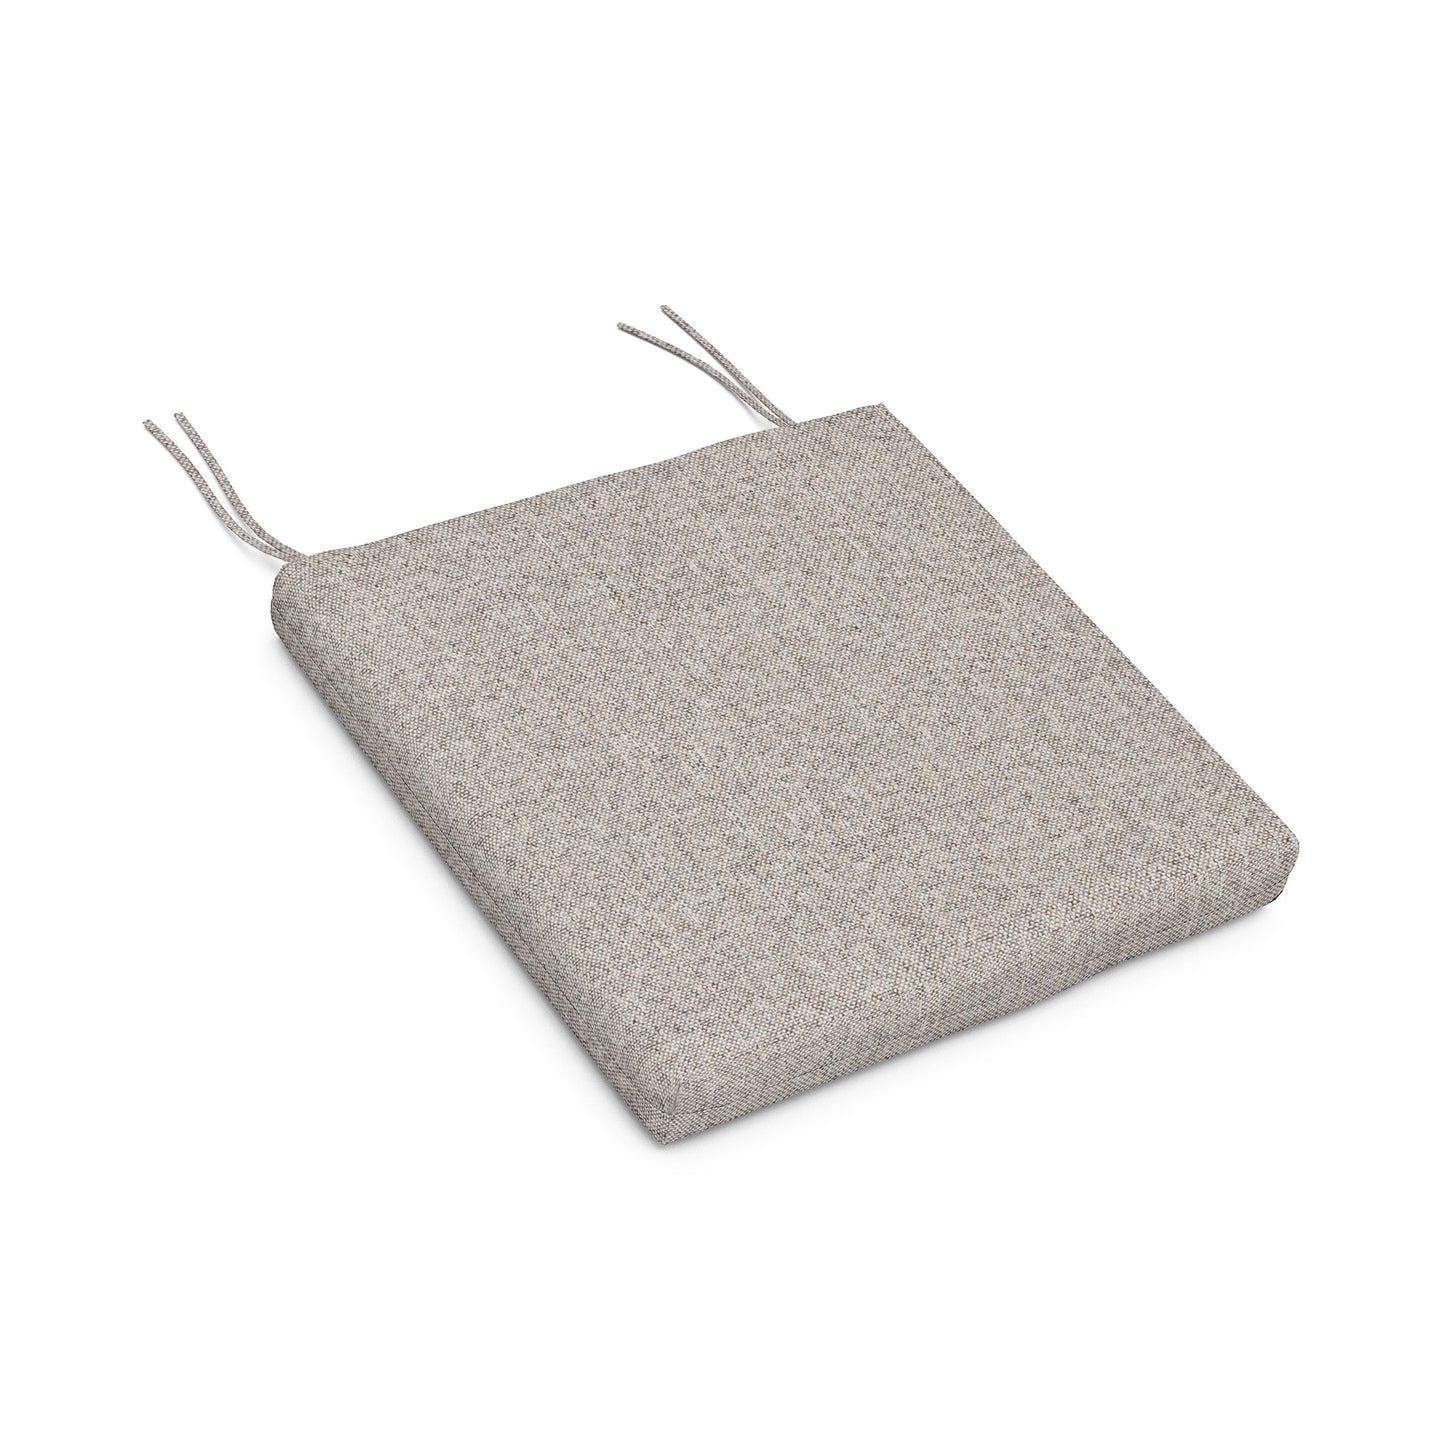 A gray weather-resistant upholstery fabric POLYWOOD XPWS0149 - Seat Cushion with two tie straps on a white background.